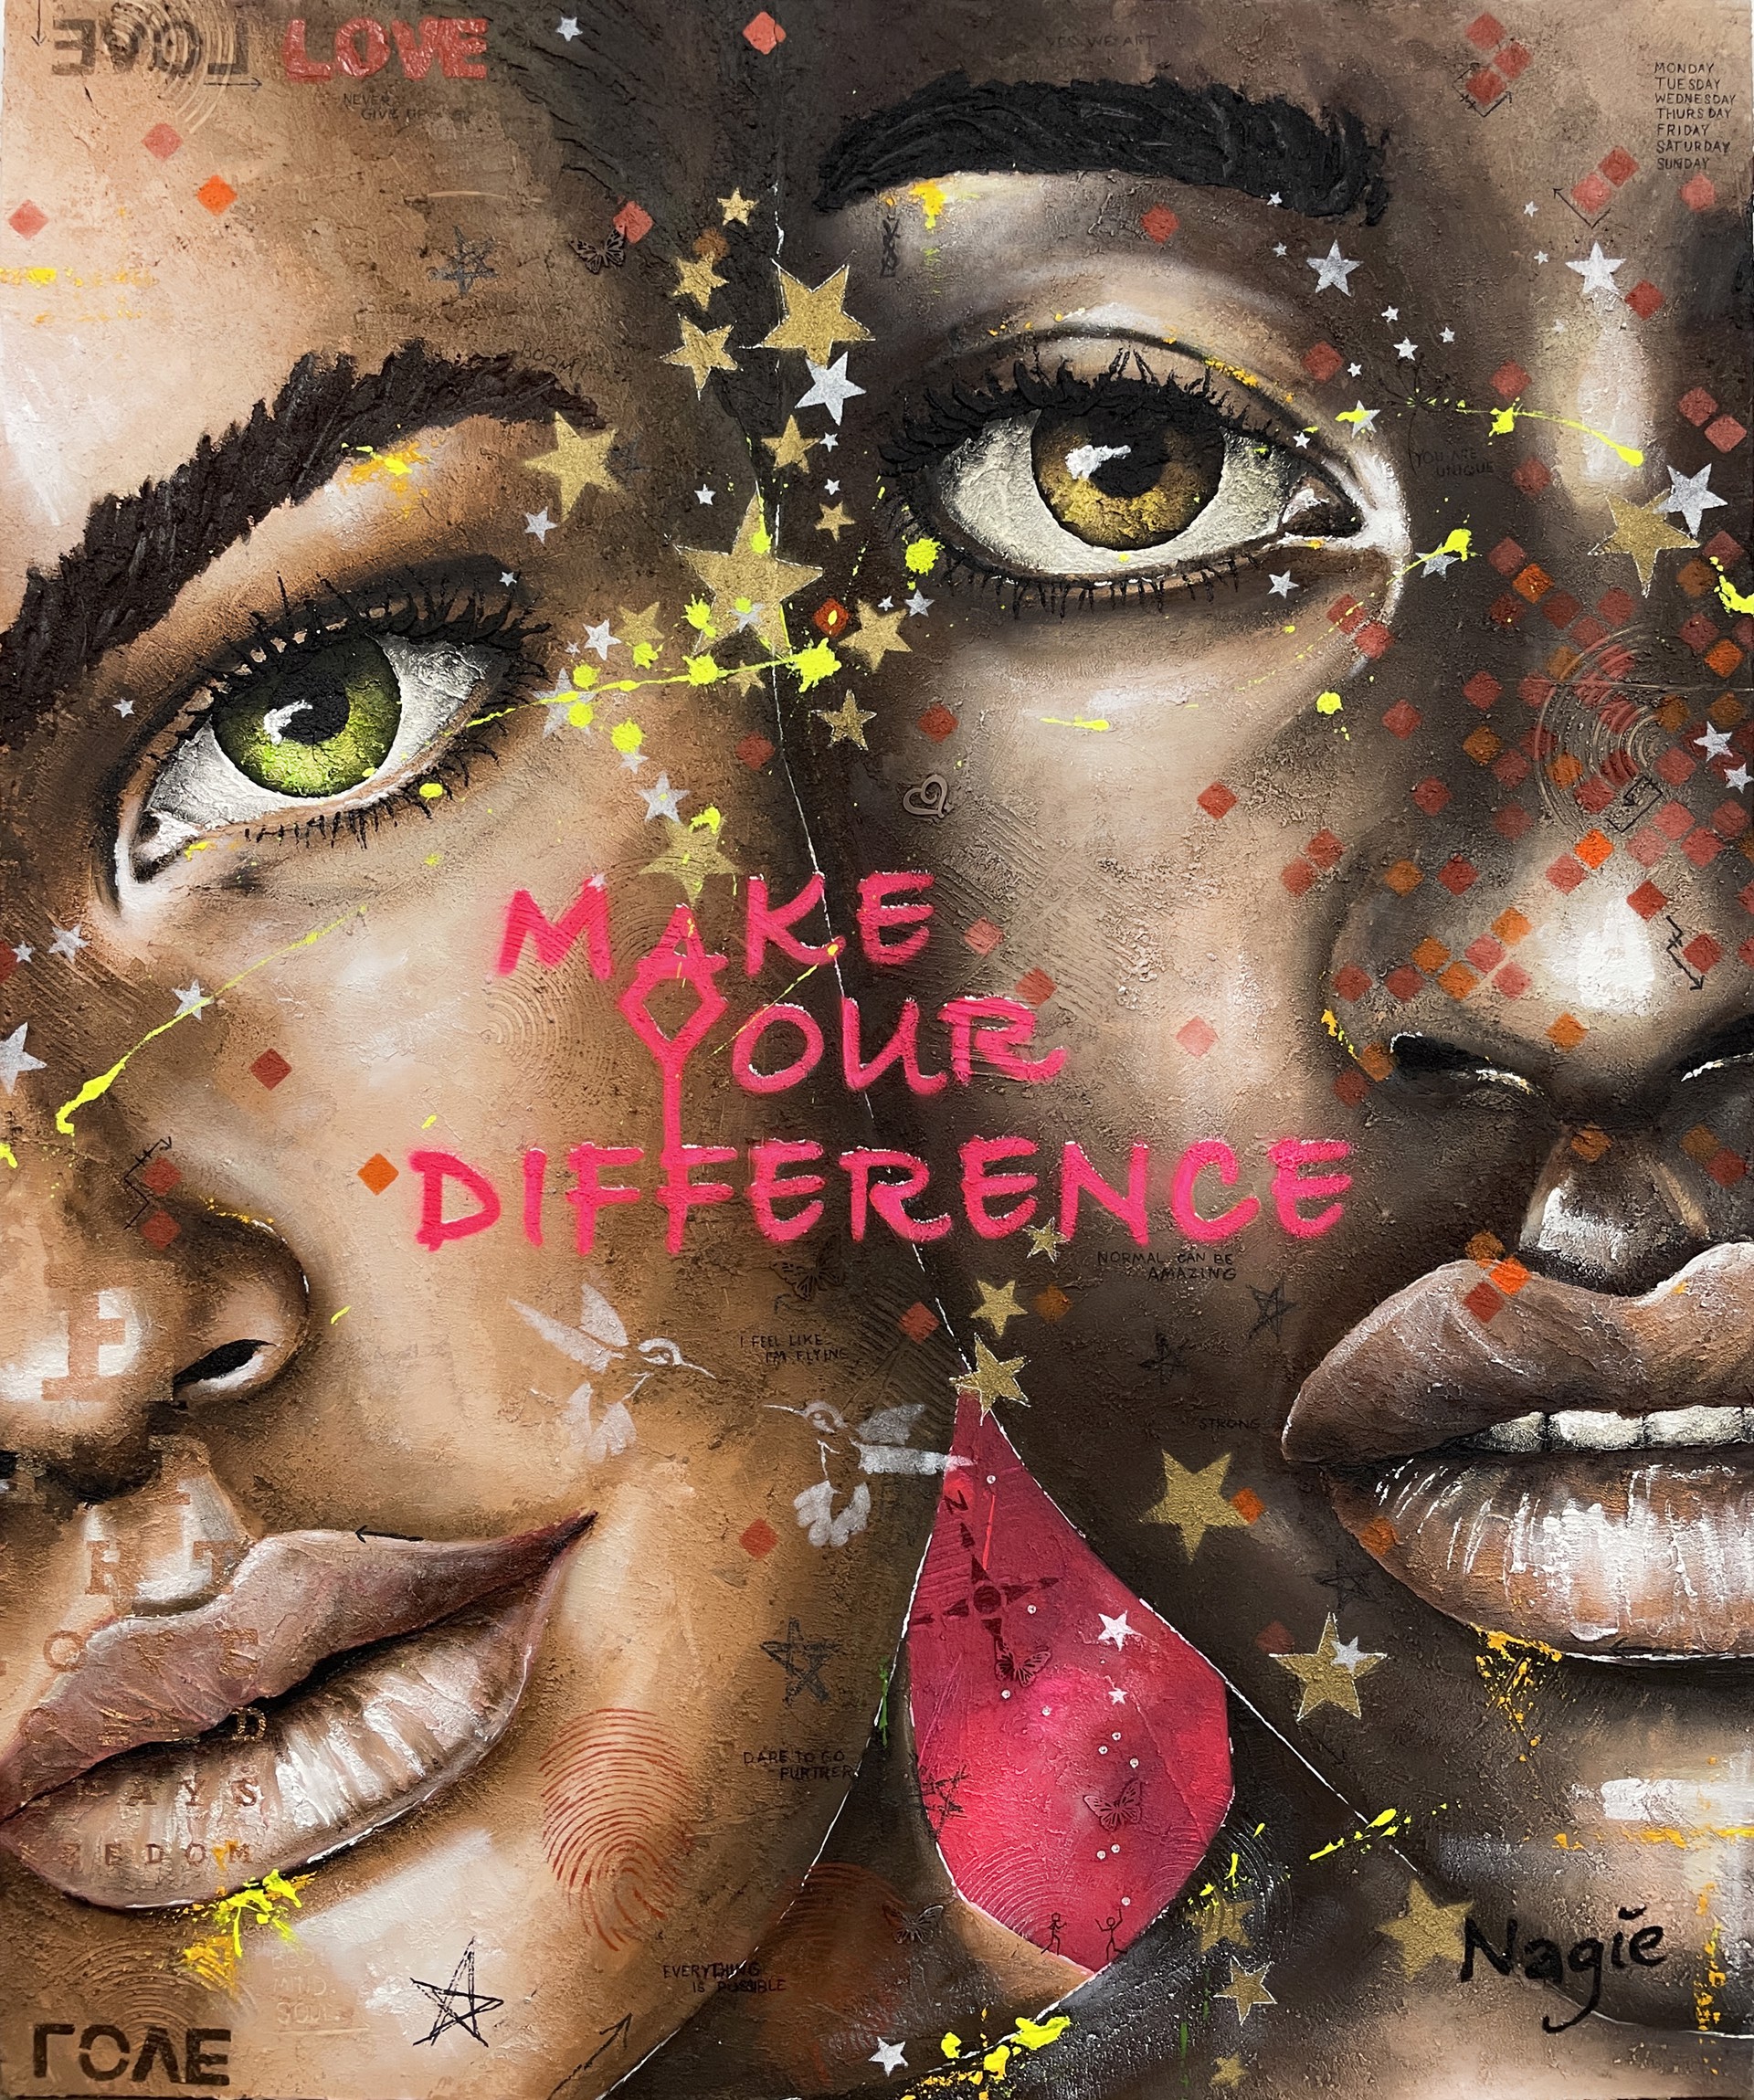 Make your difference by Nagie